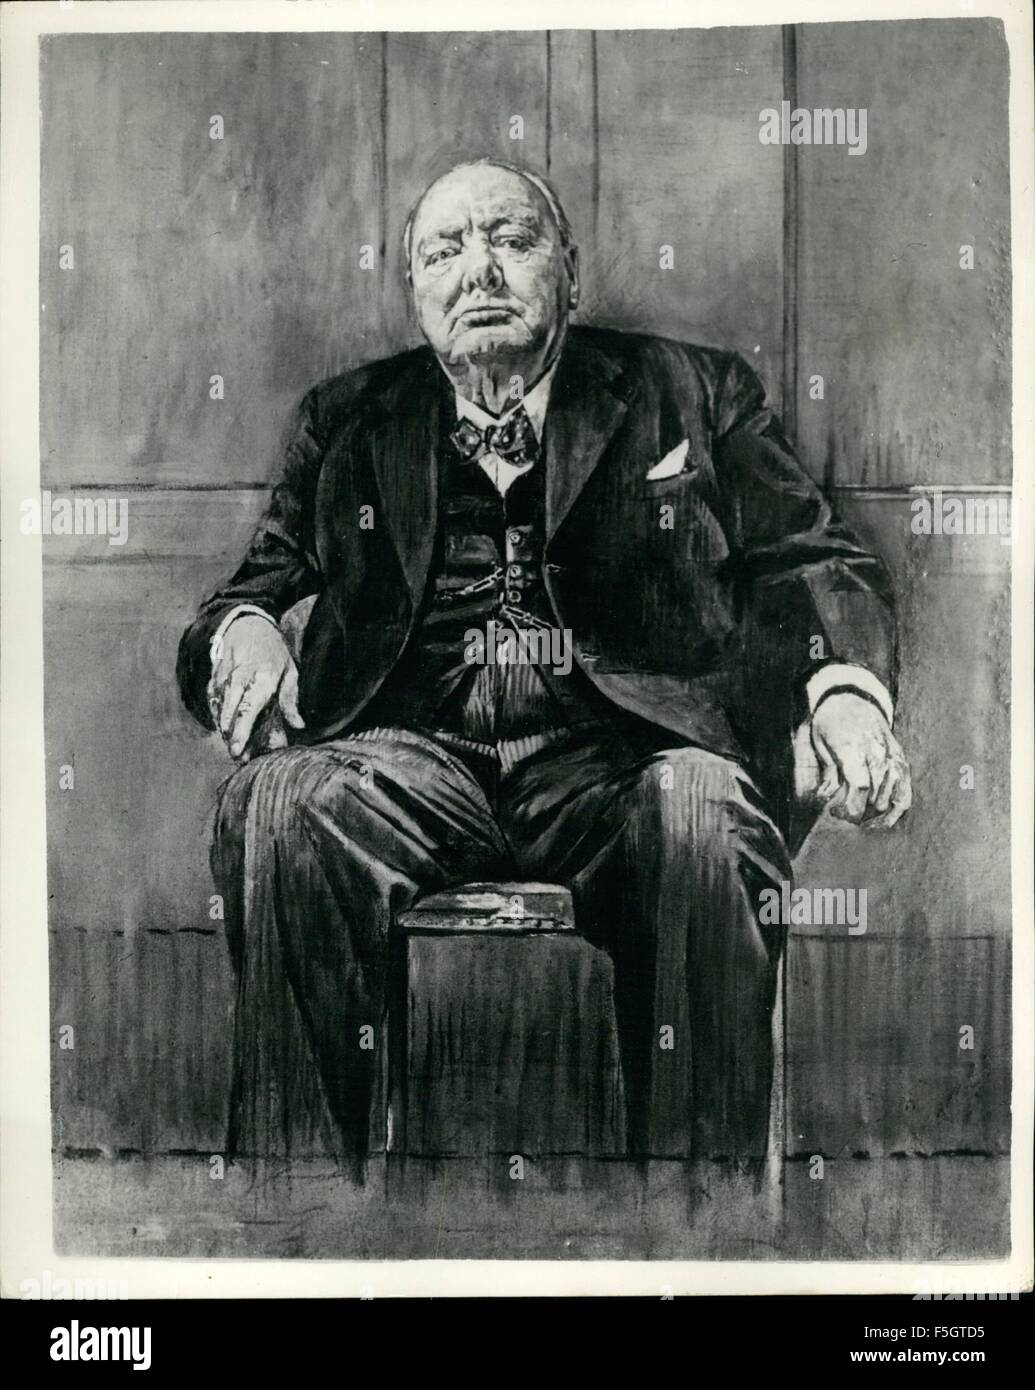 1949 - The Portrait painted by Mr. Graham Sutherland presented to Sir Winston Churchill on his 80th Birthday by past and present members of the houses of lords and commons. © Keystone Pictures USA/ZUMAPRESS.com/Alamy Live News Stock Photo